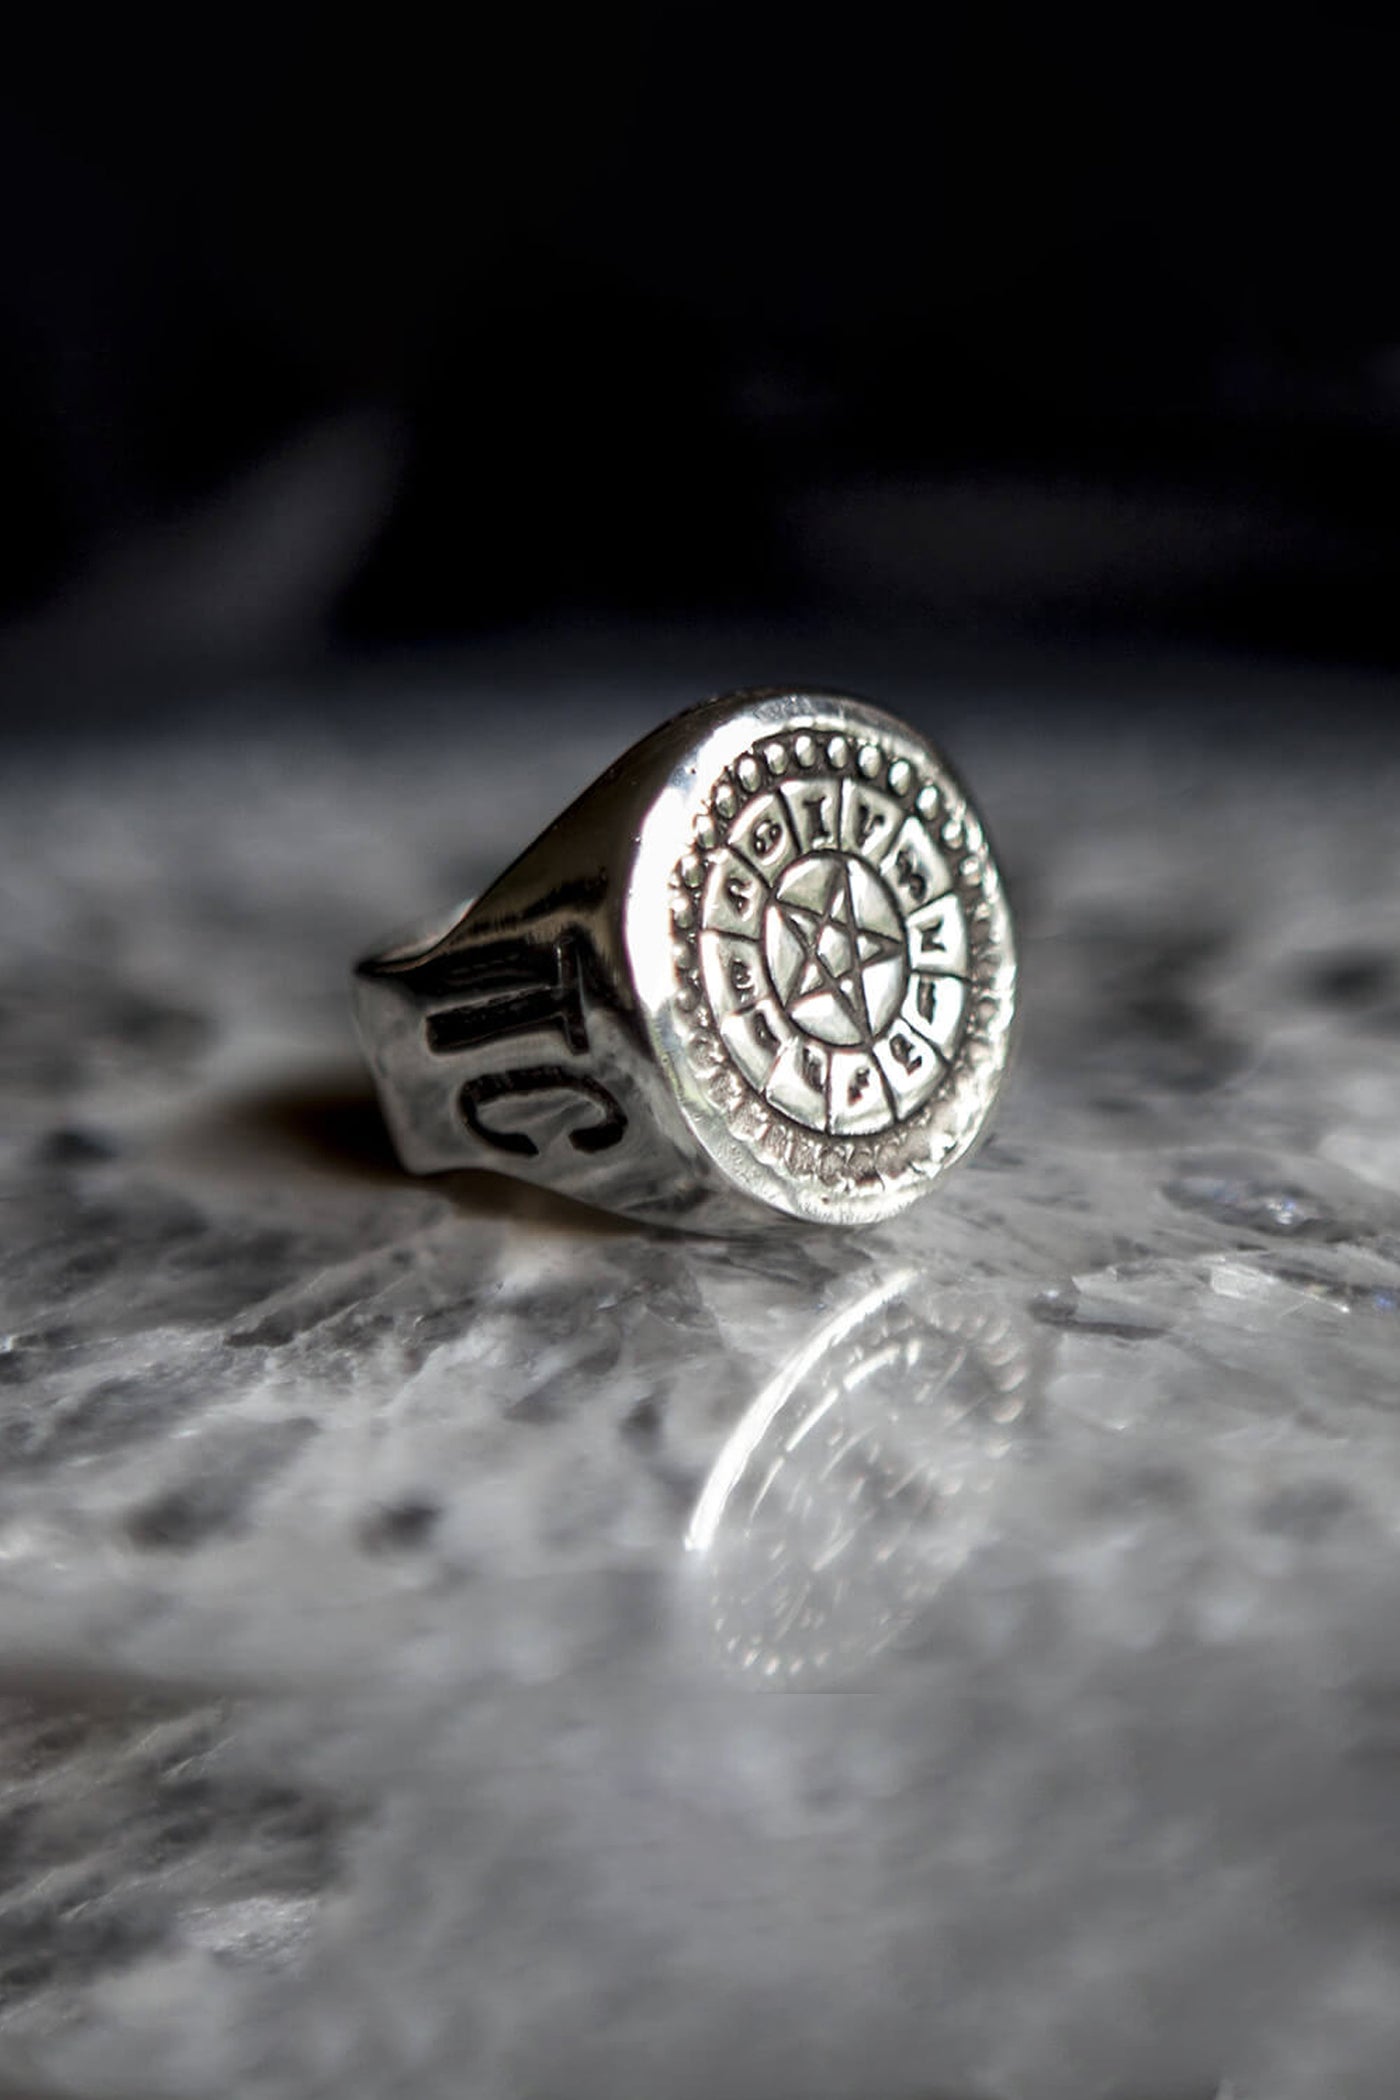 Occultism Tablet Ring (Windfall Jewellery Collaboration)